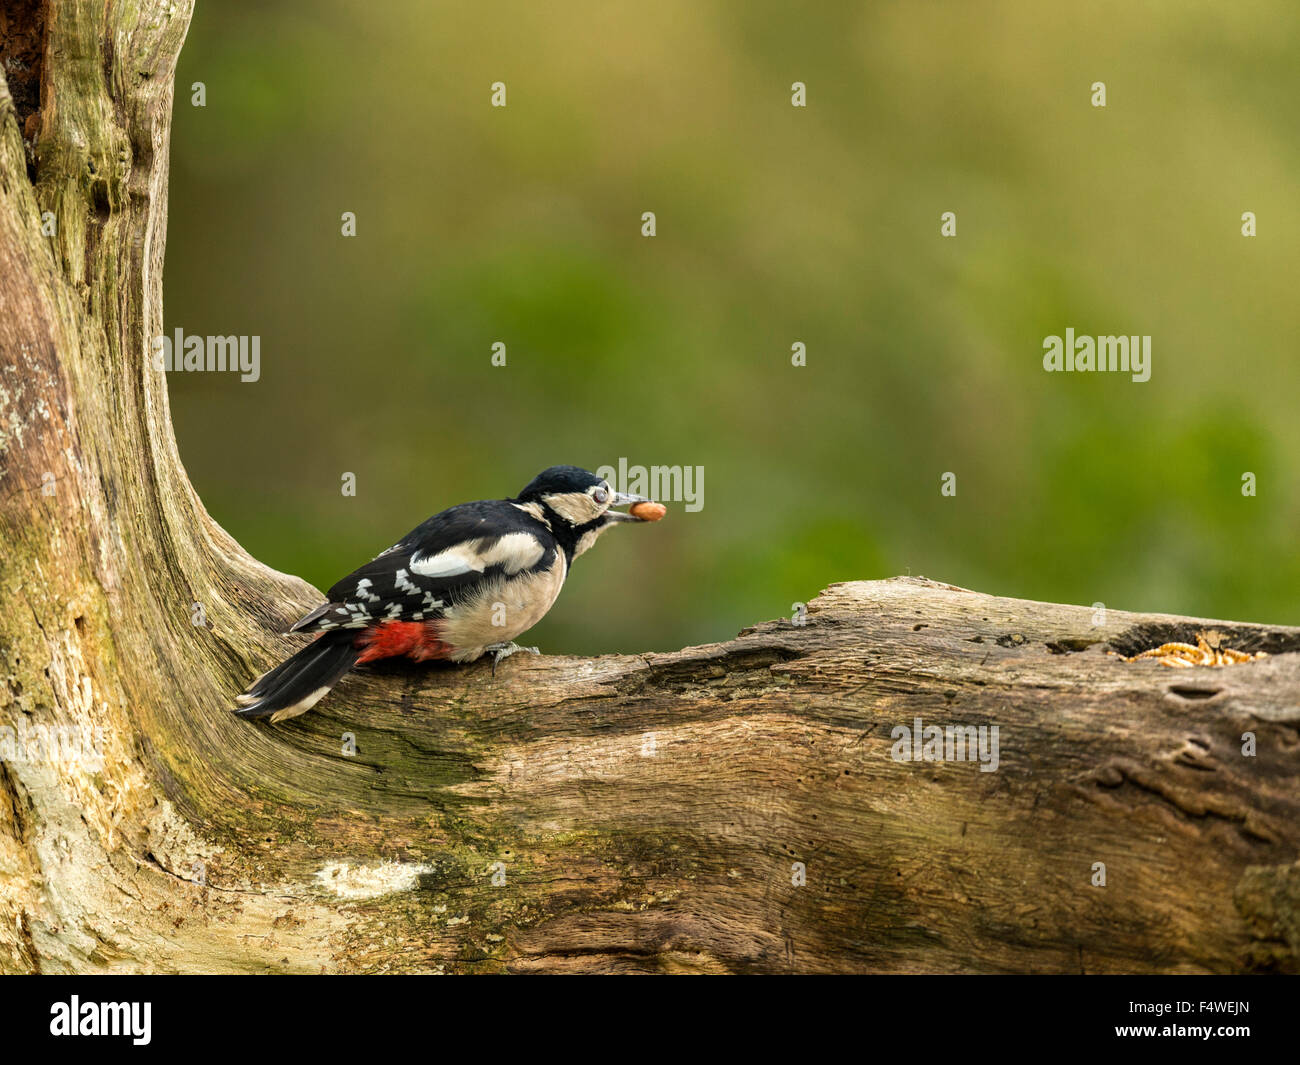 Great Spotted Woodpecker (Dendrocopos major) foraging in a natural woodland setting. 'Isolated, presenting a peanut in its beak' Stock Photo